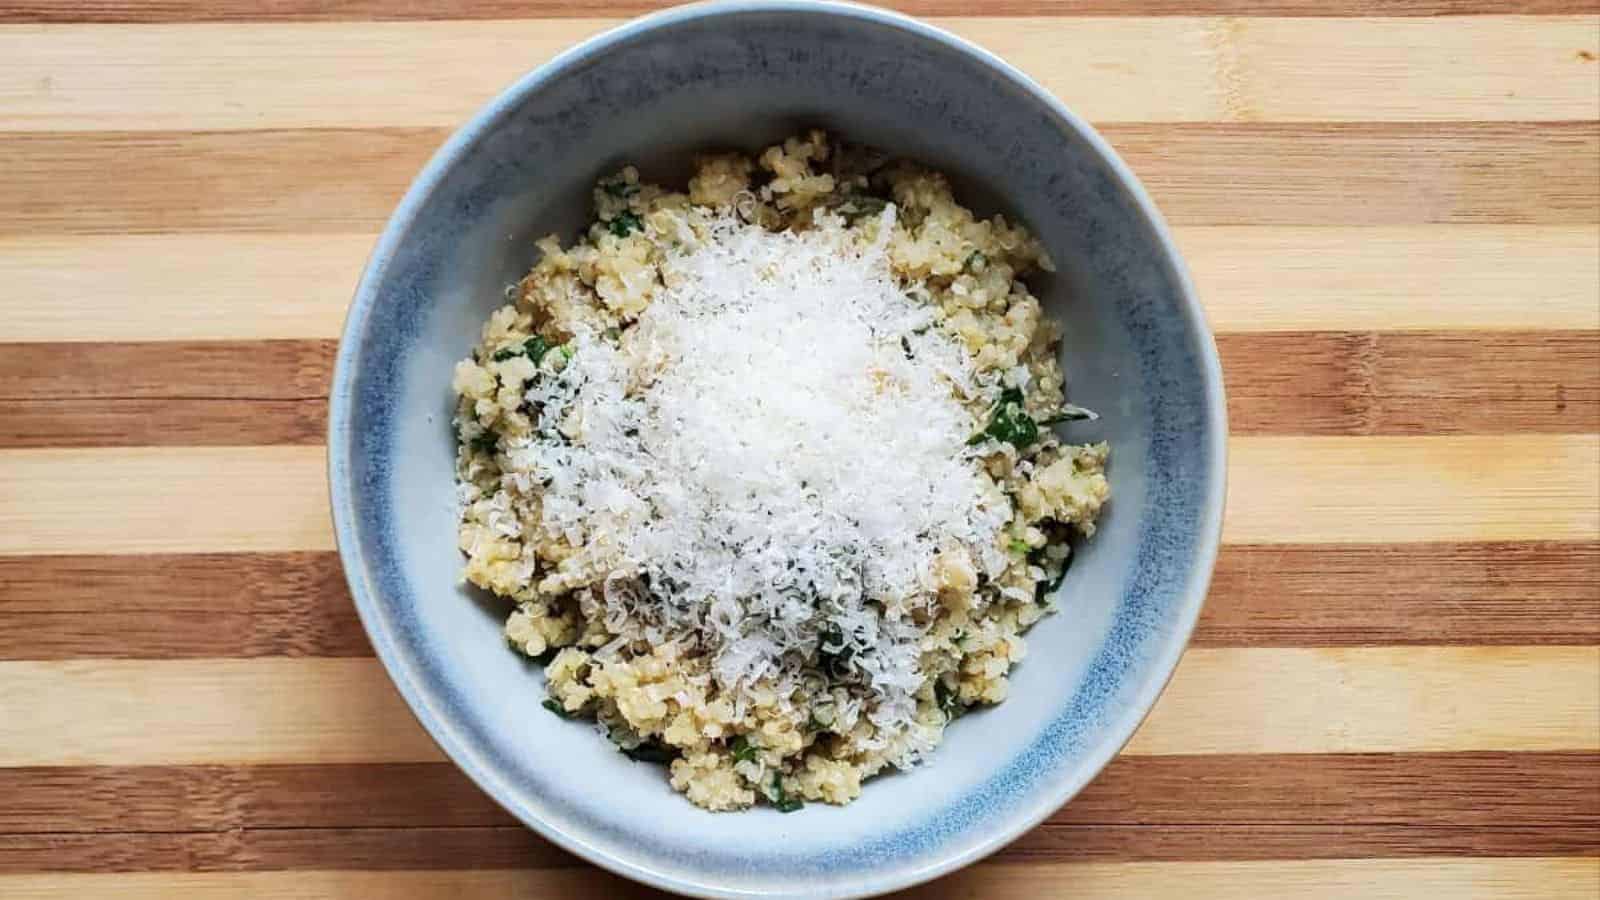 Image shows an overhead shot of Spinach Parmesan Quinoa in a blue bowl with a sprinkle of cheese on top.